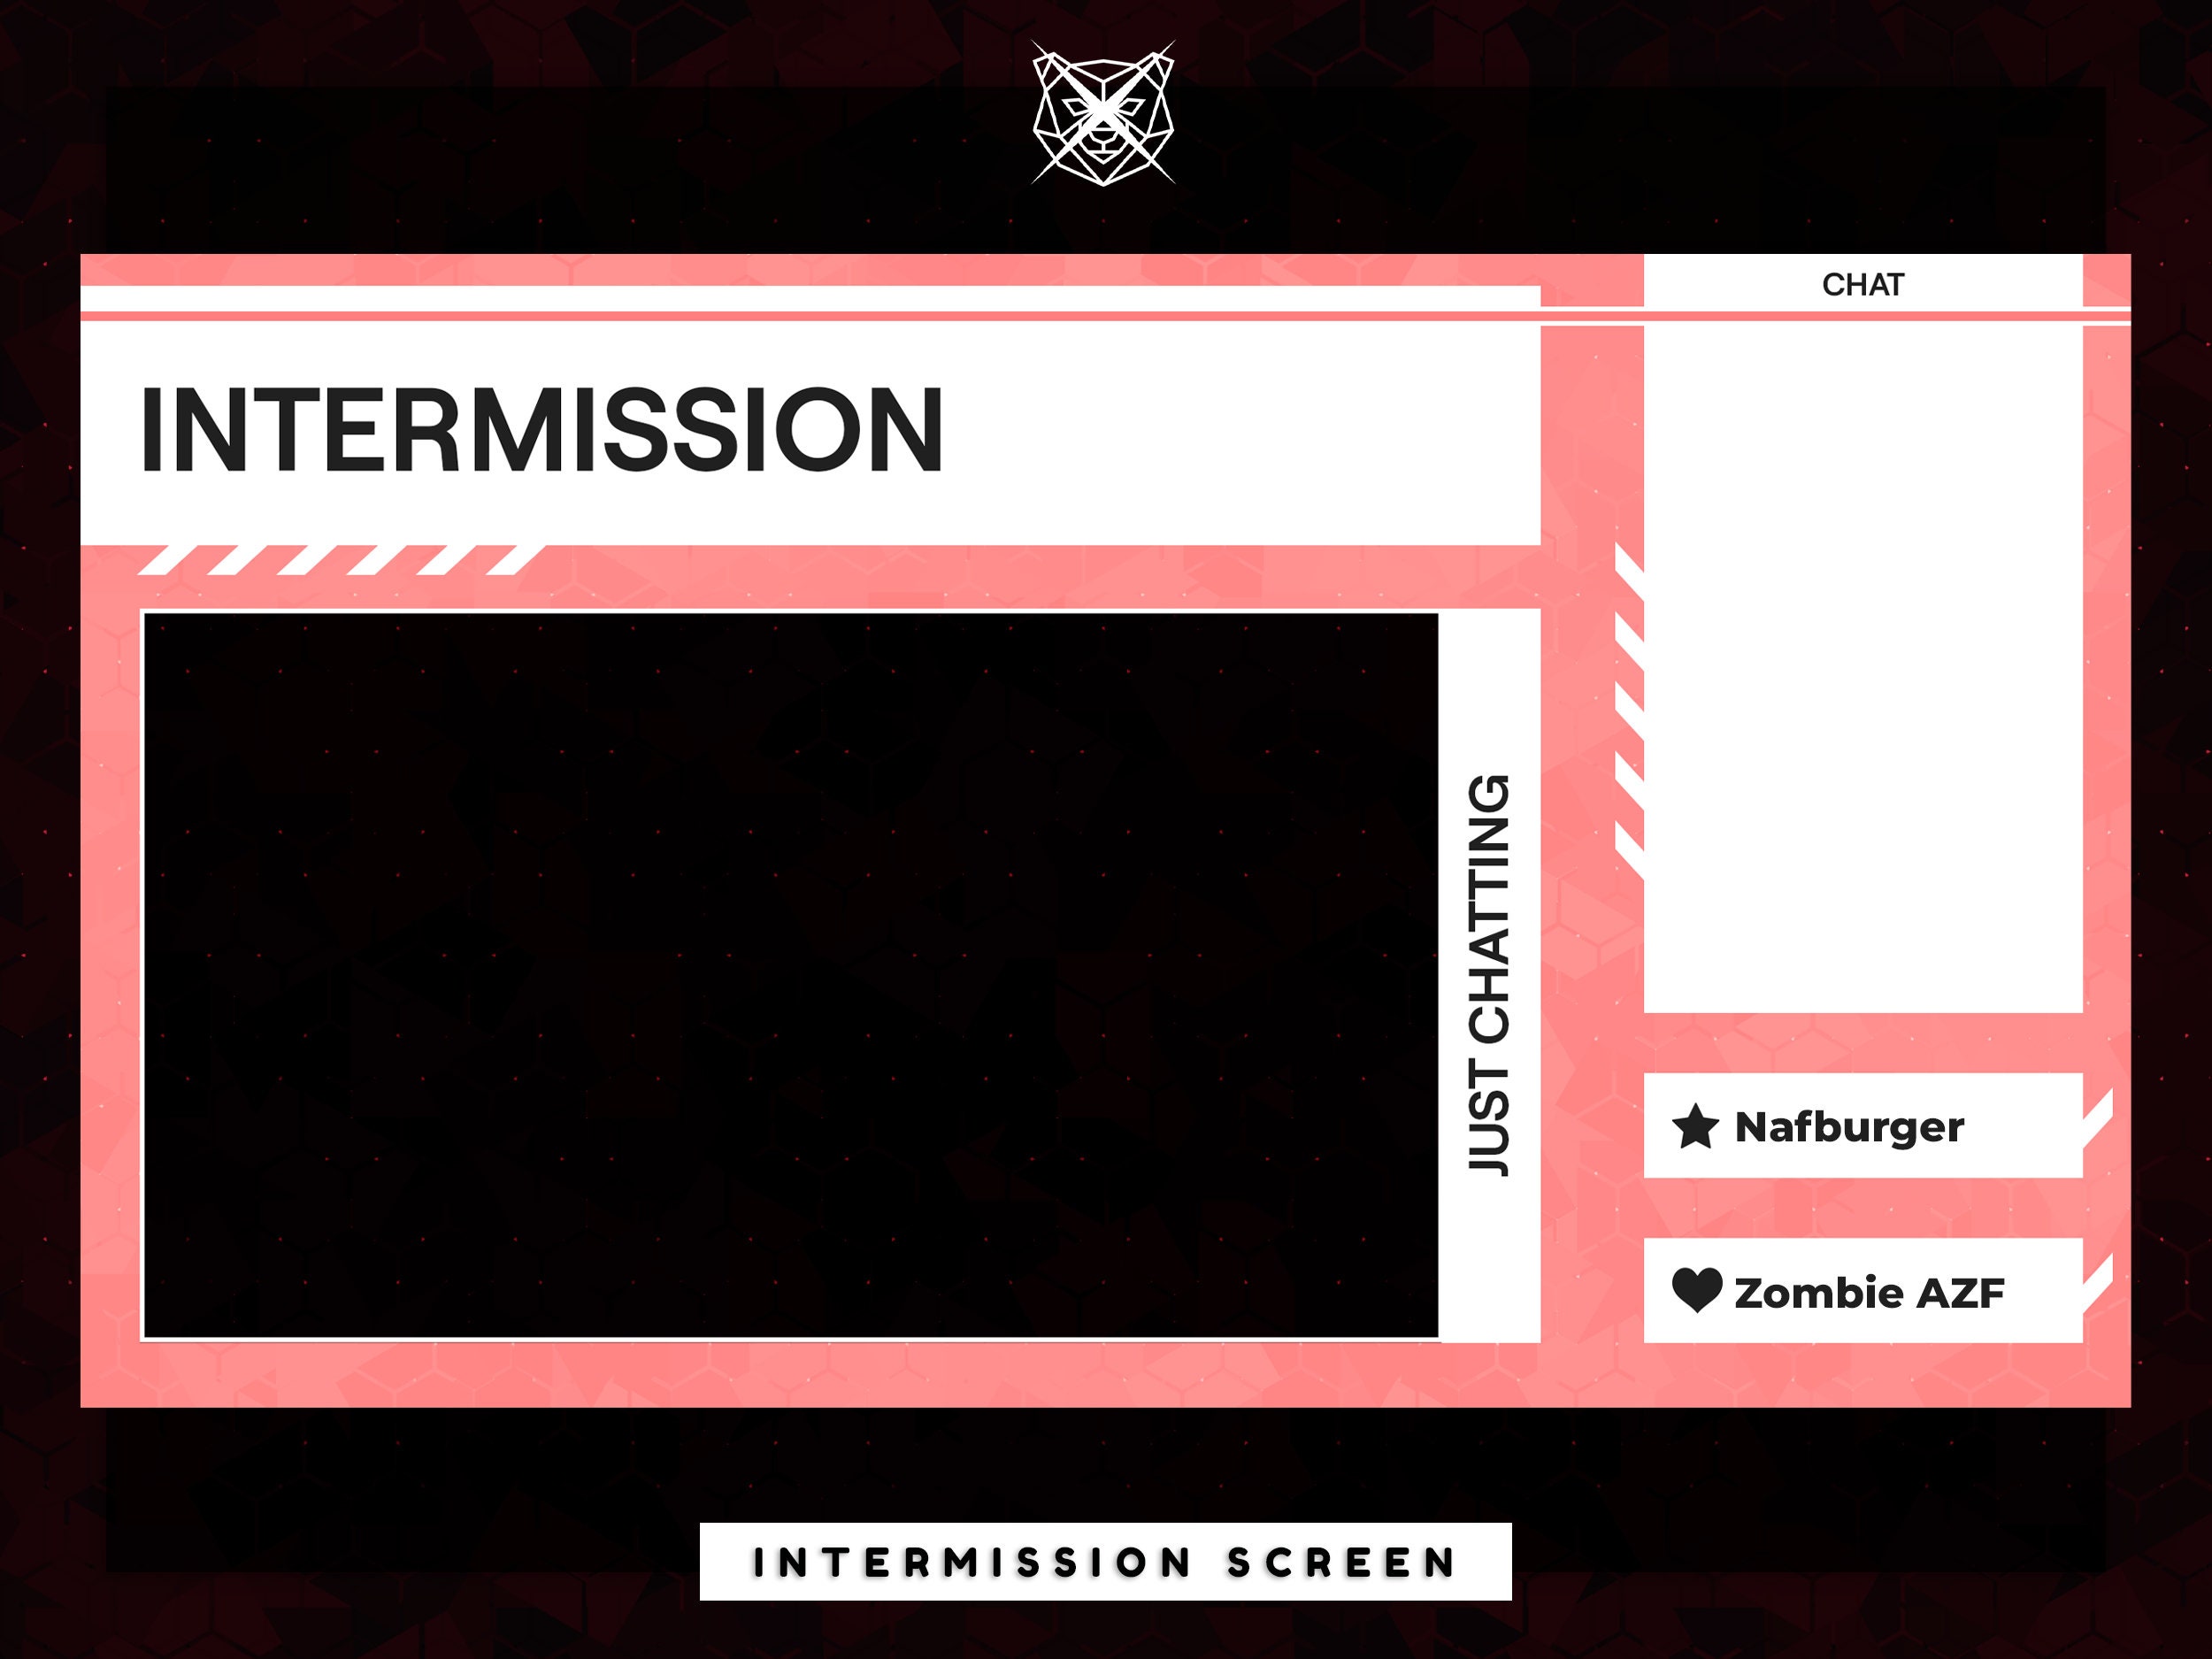 Create just chatting, intermission screen for twitch by